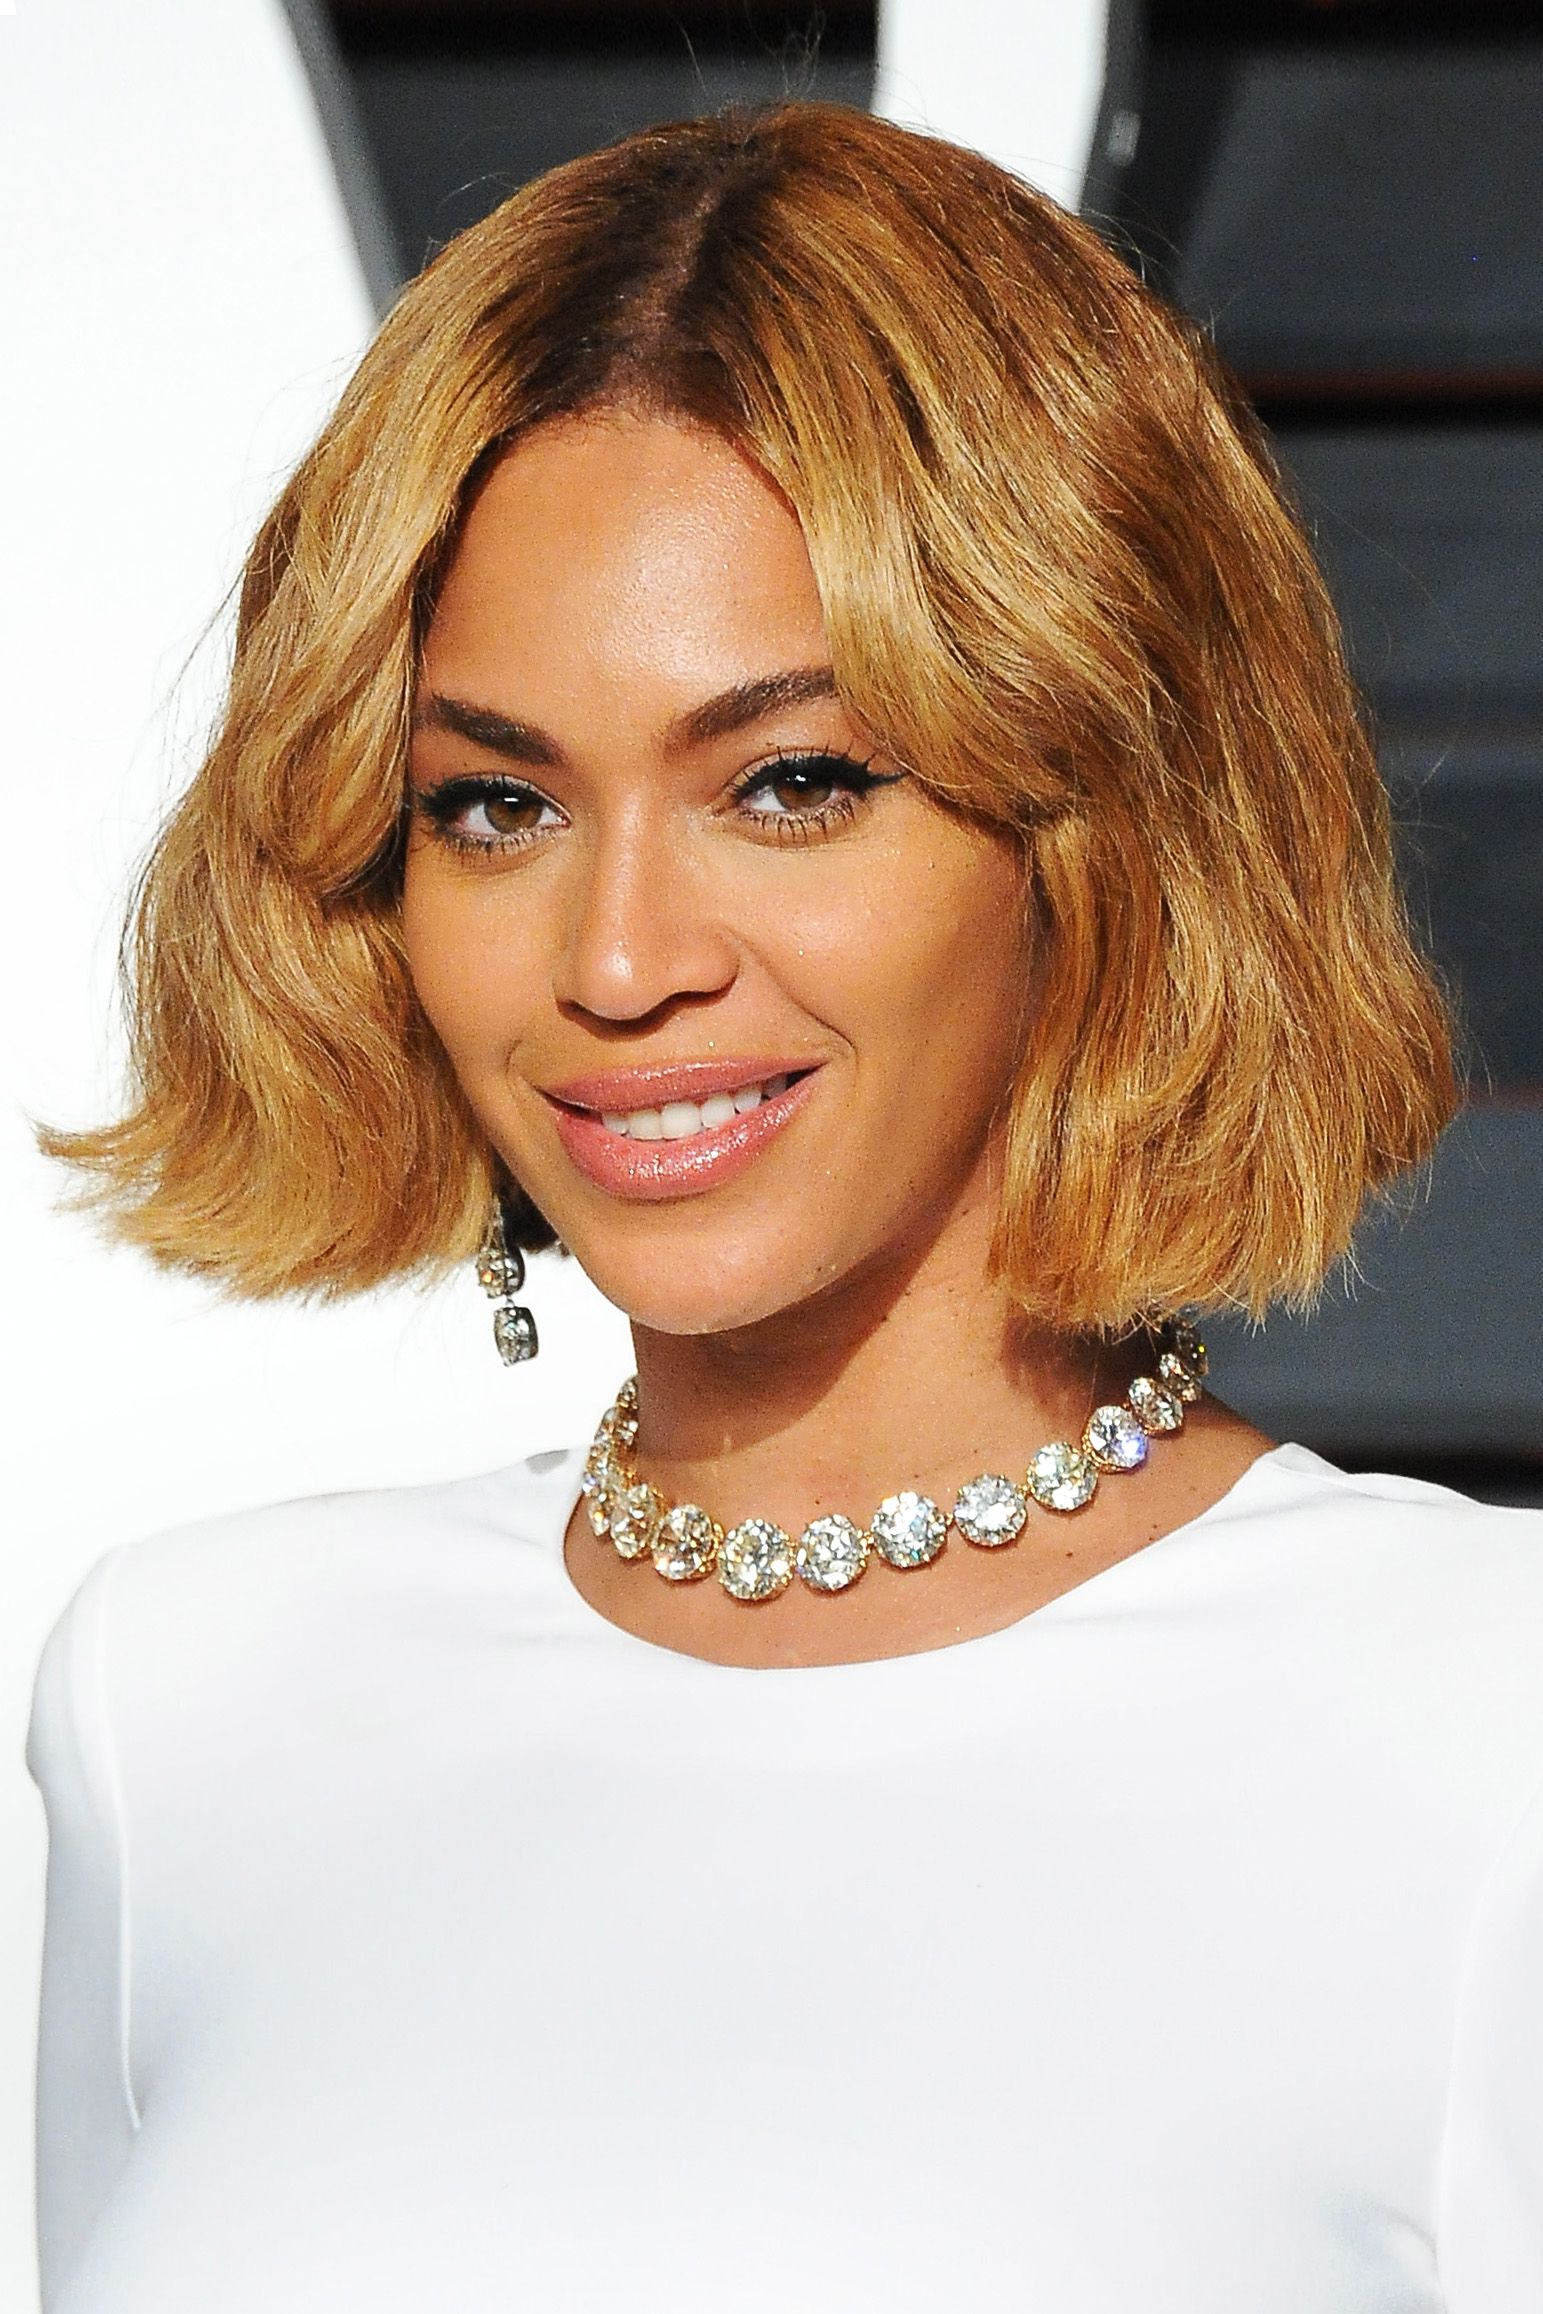 Blame Permanent doll 80 Best Beyonce Hairstyles of All Time - Beyoncé's Evolving Hair Looks